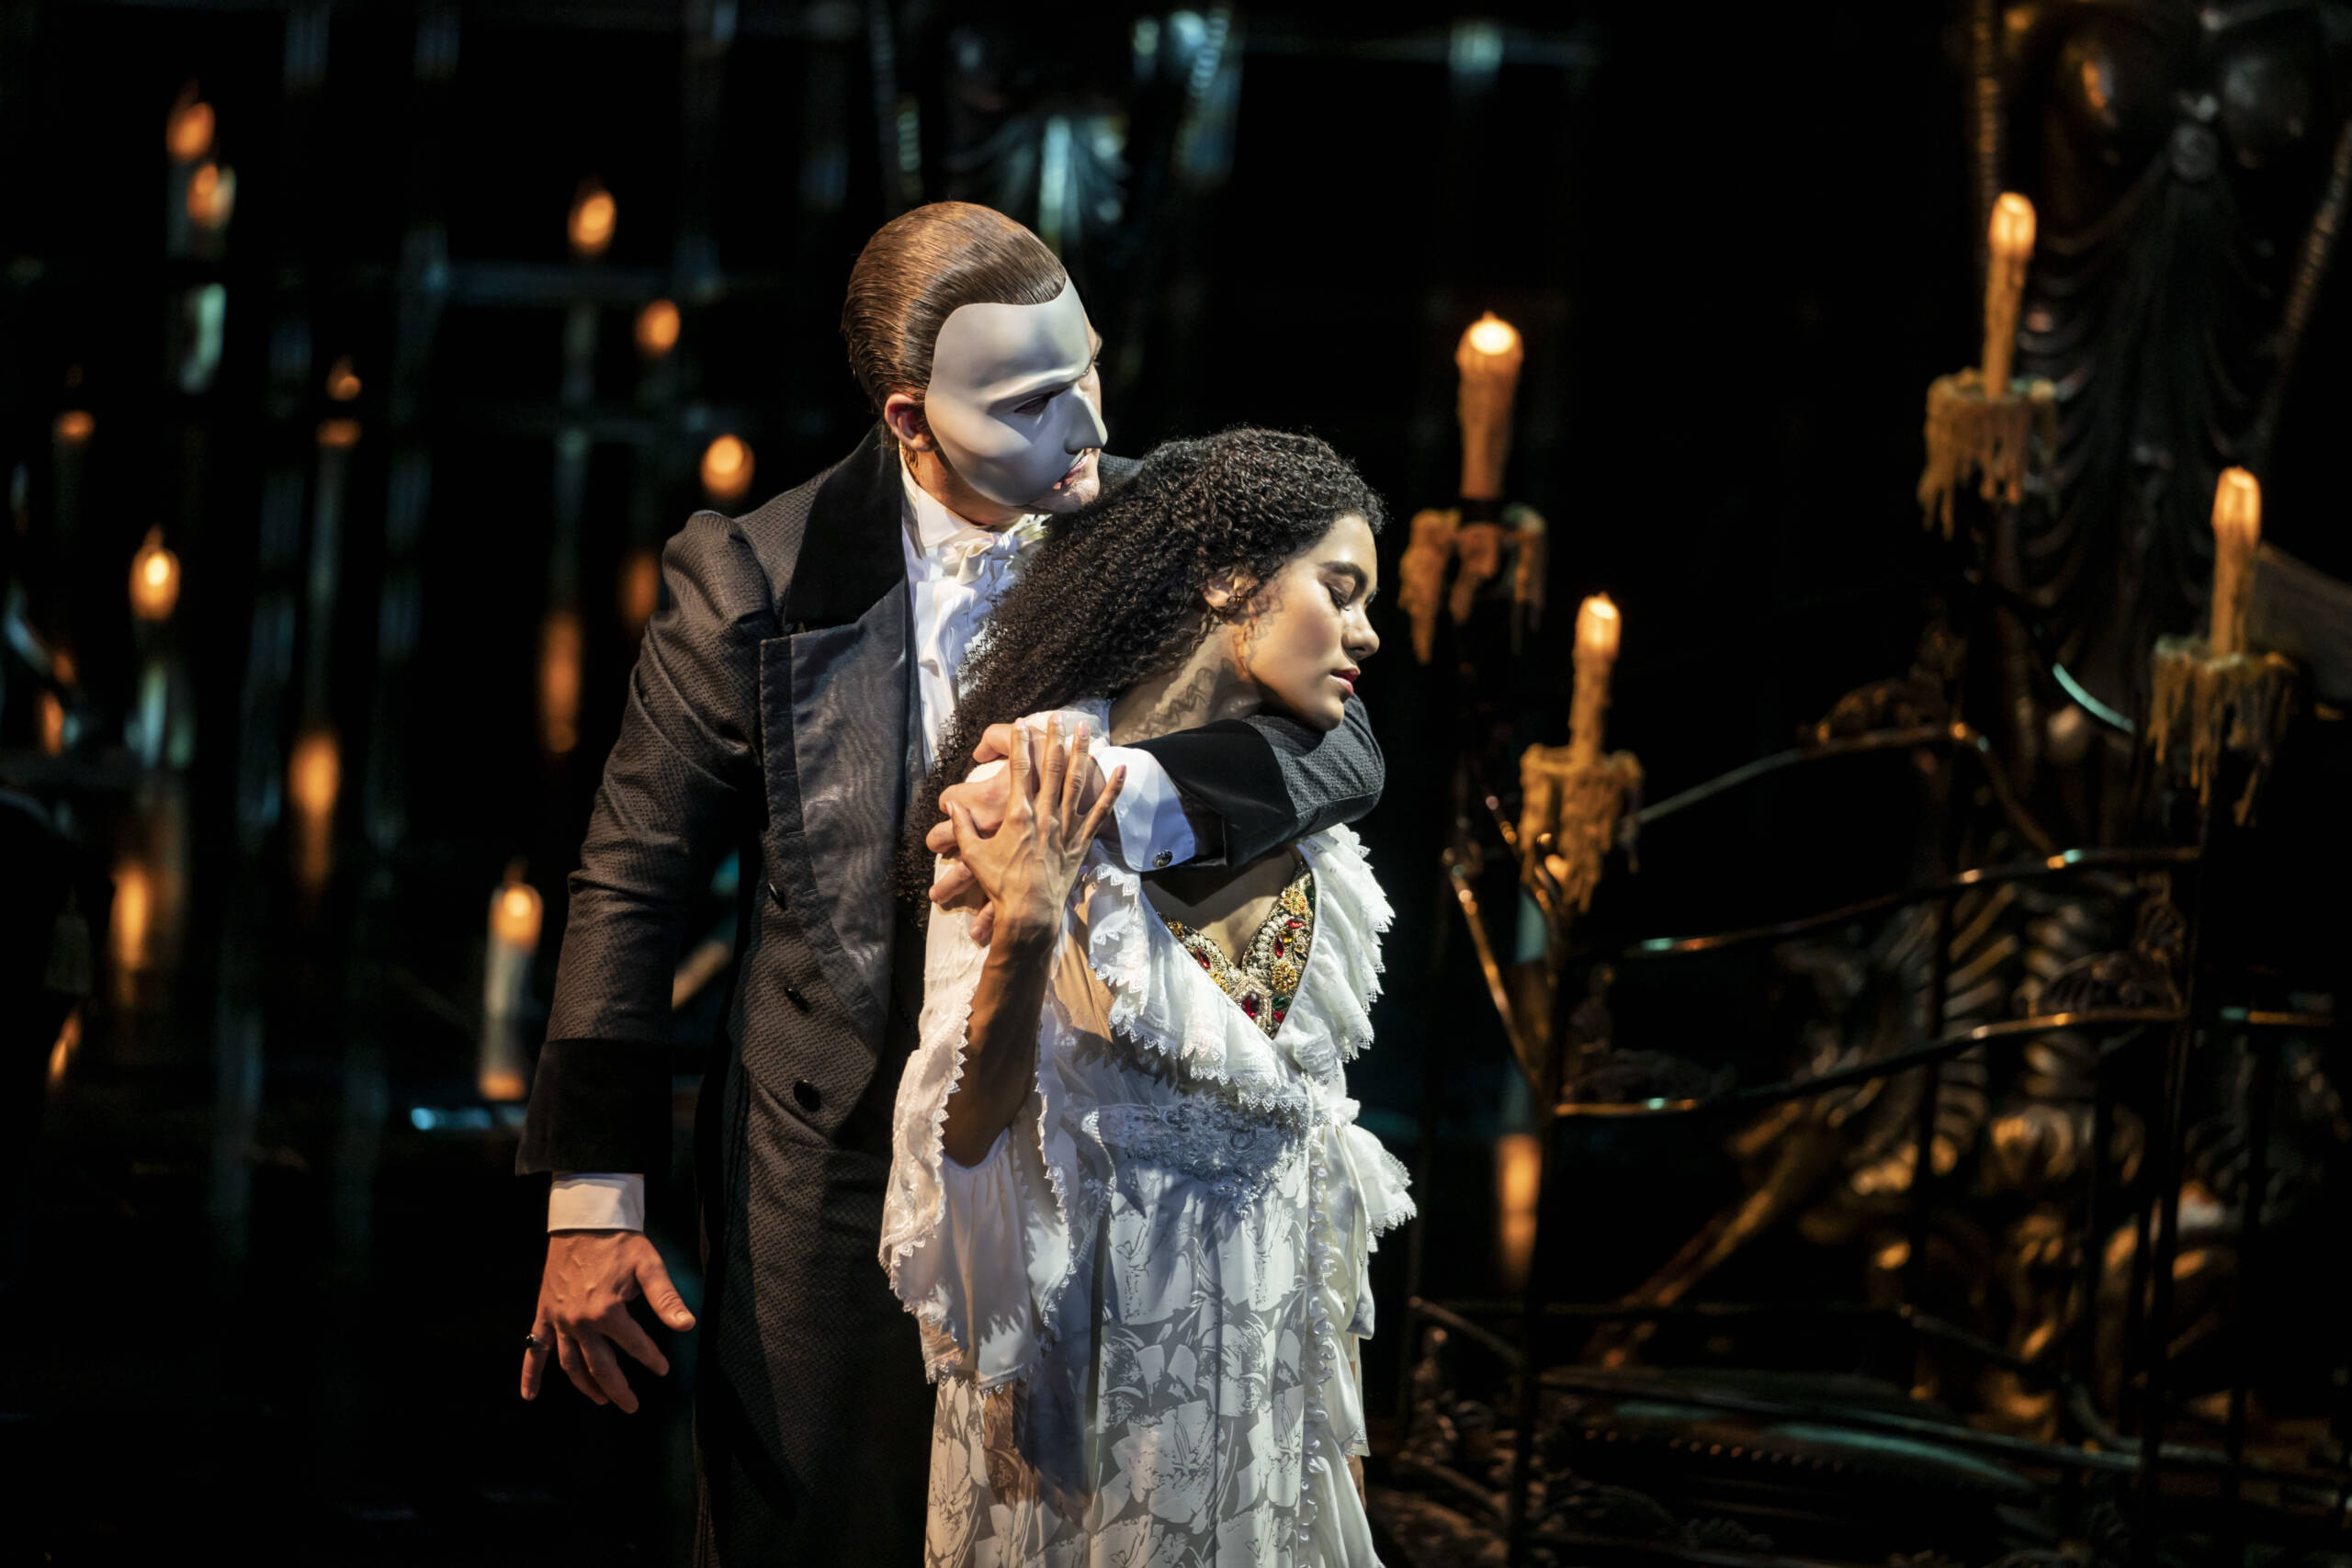 The Phantom of the Opera returns to Her Majesty's Theatre | LW Theatres